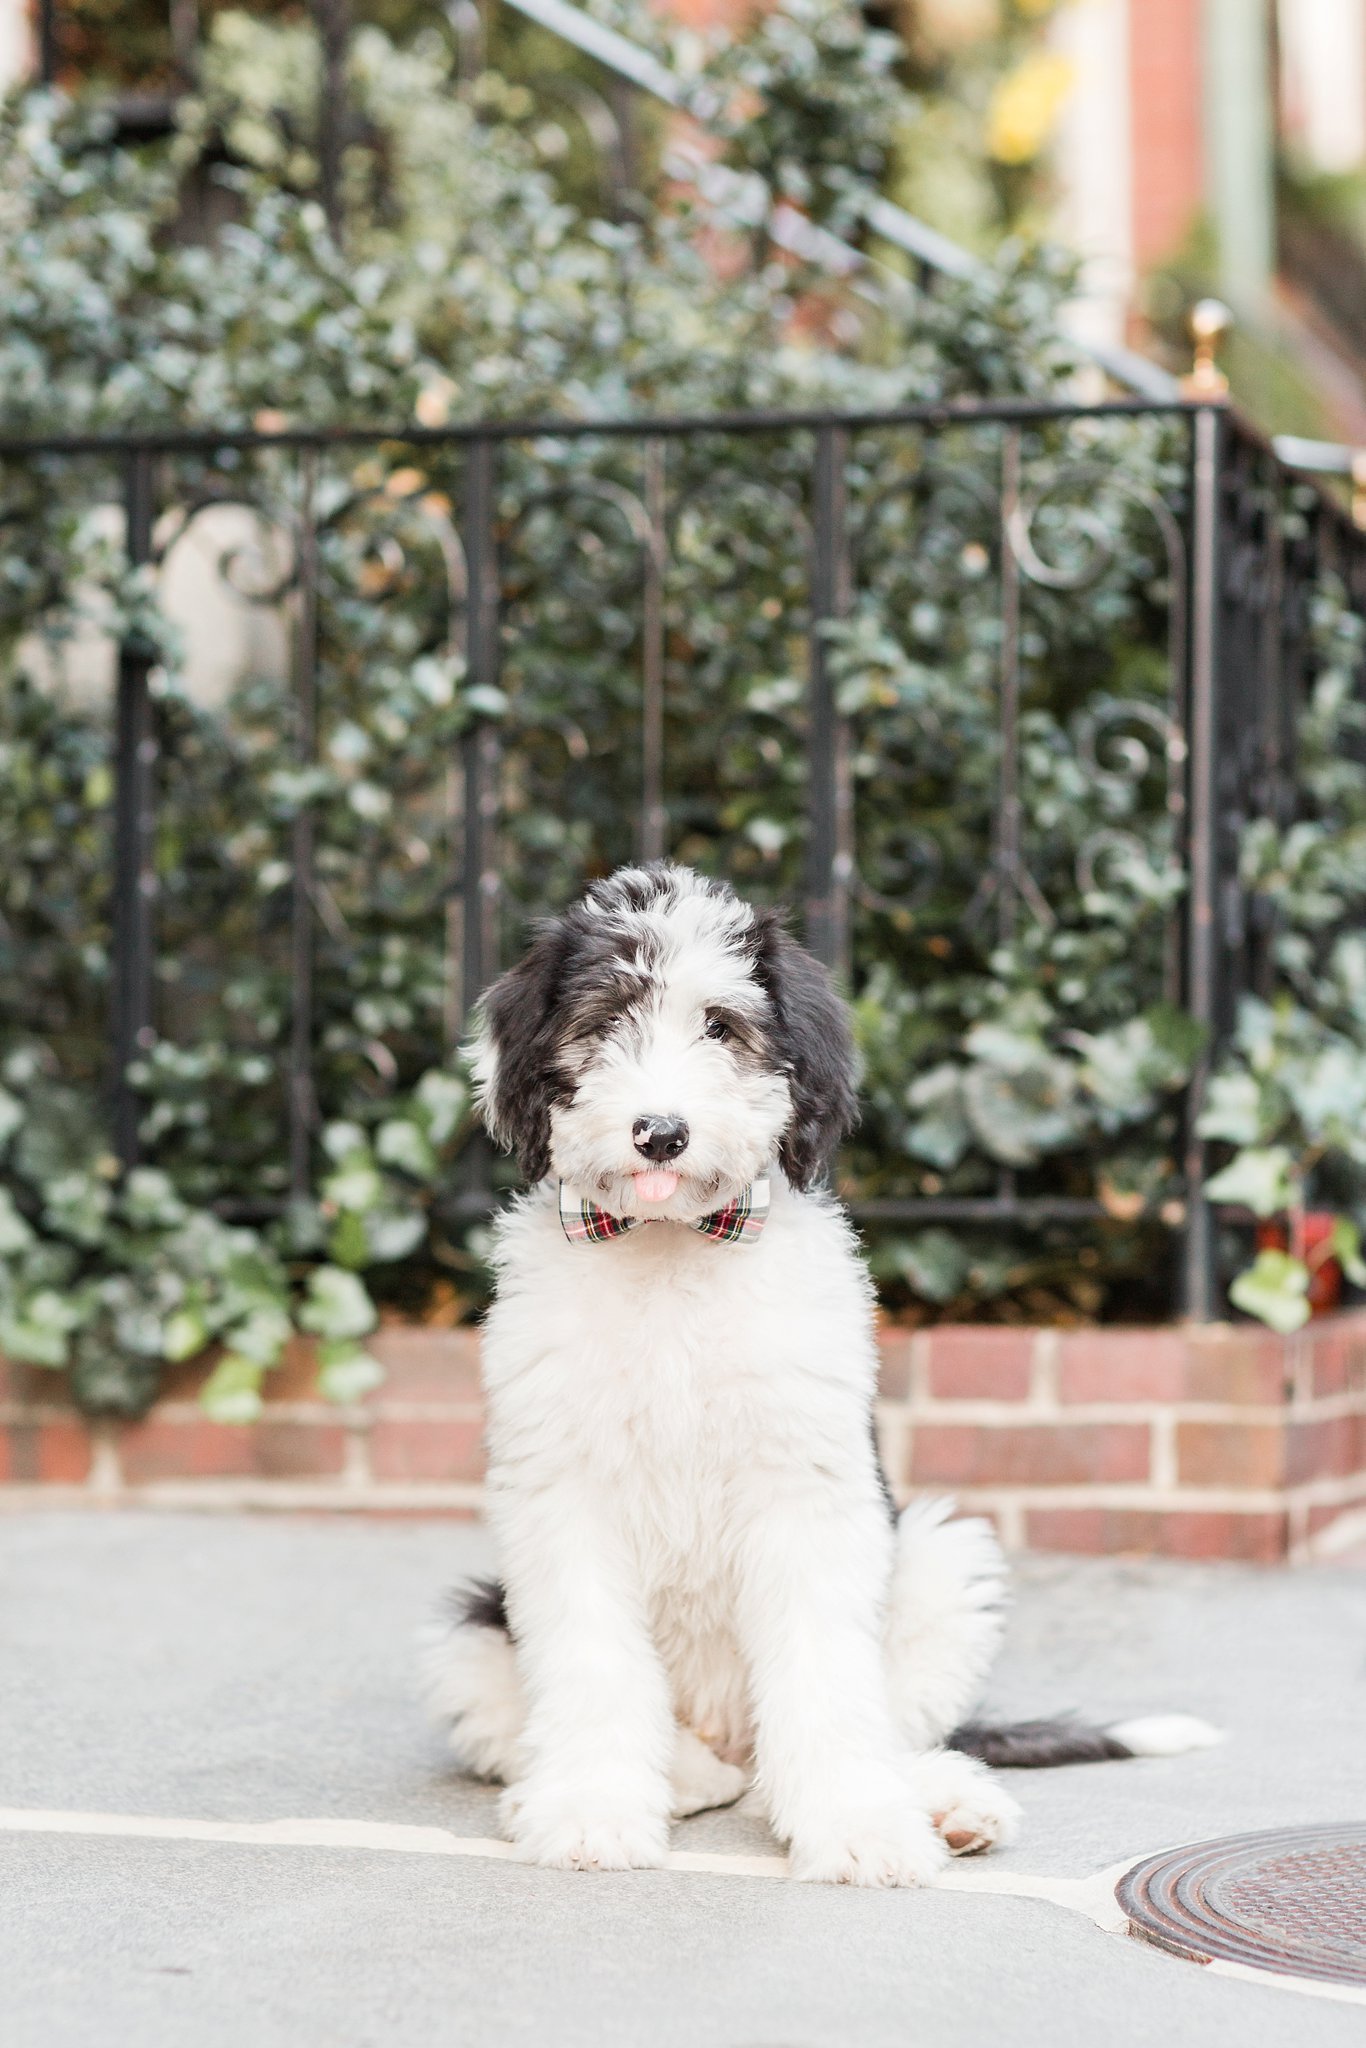 sheepadoodle puppy with his tongue sticking out